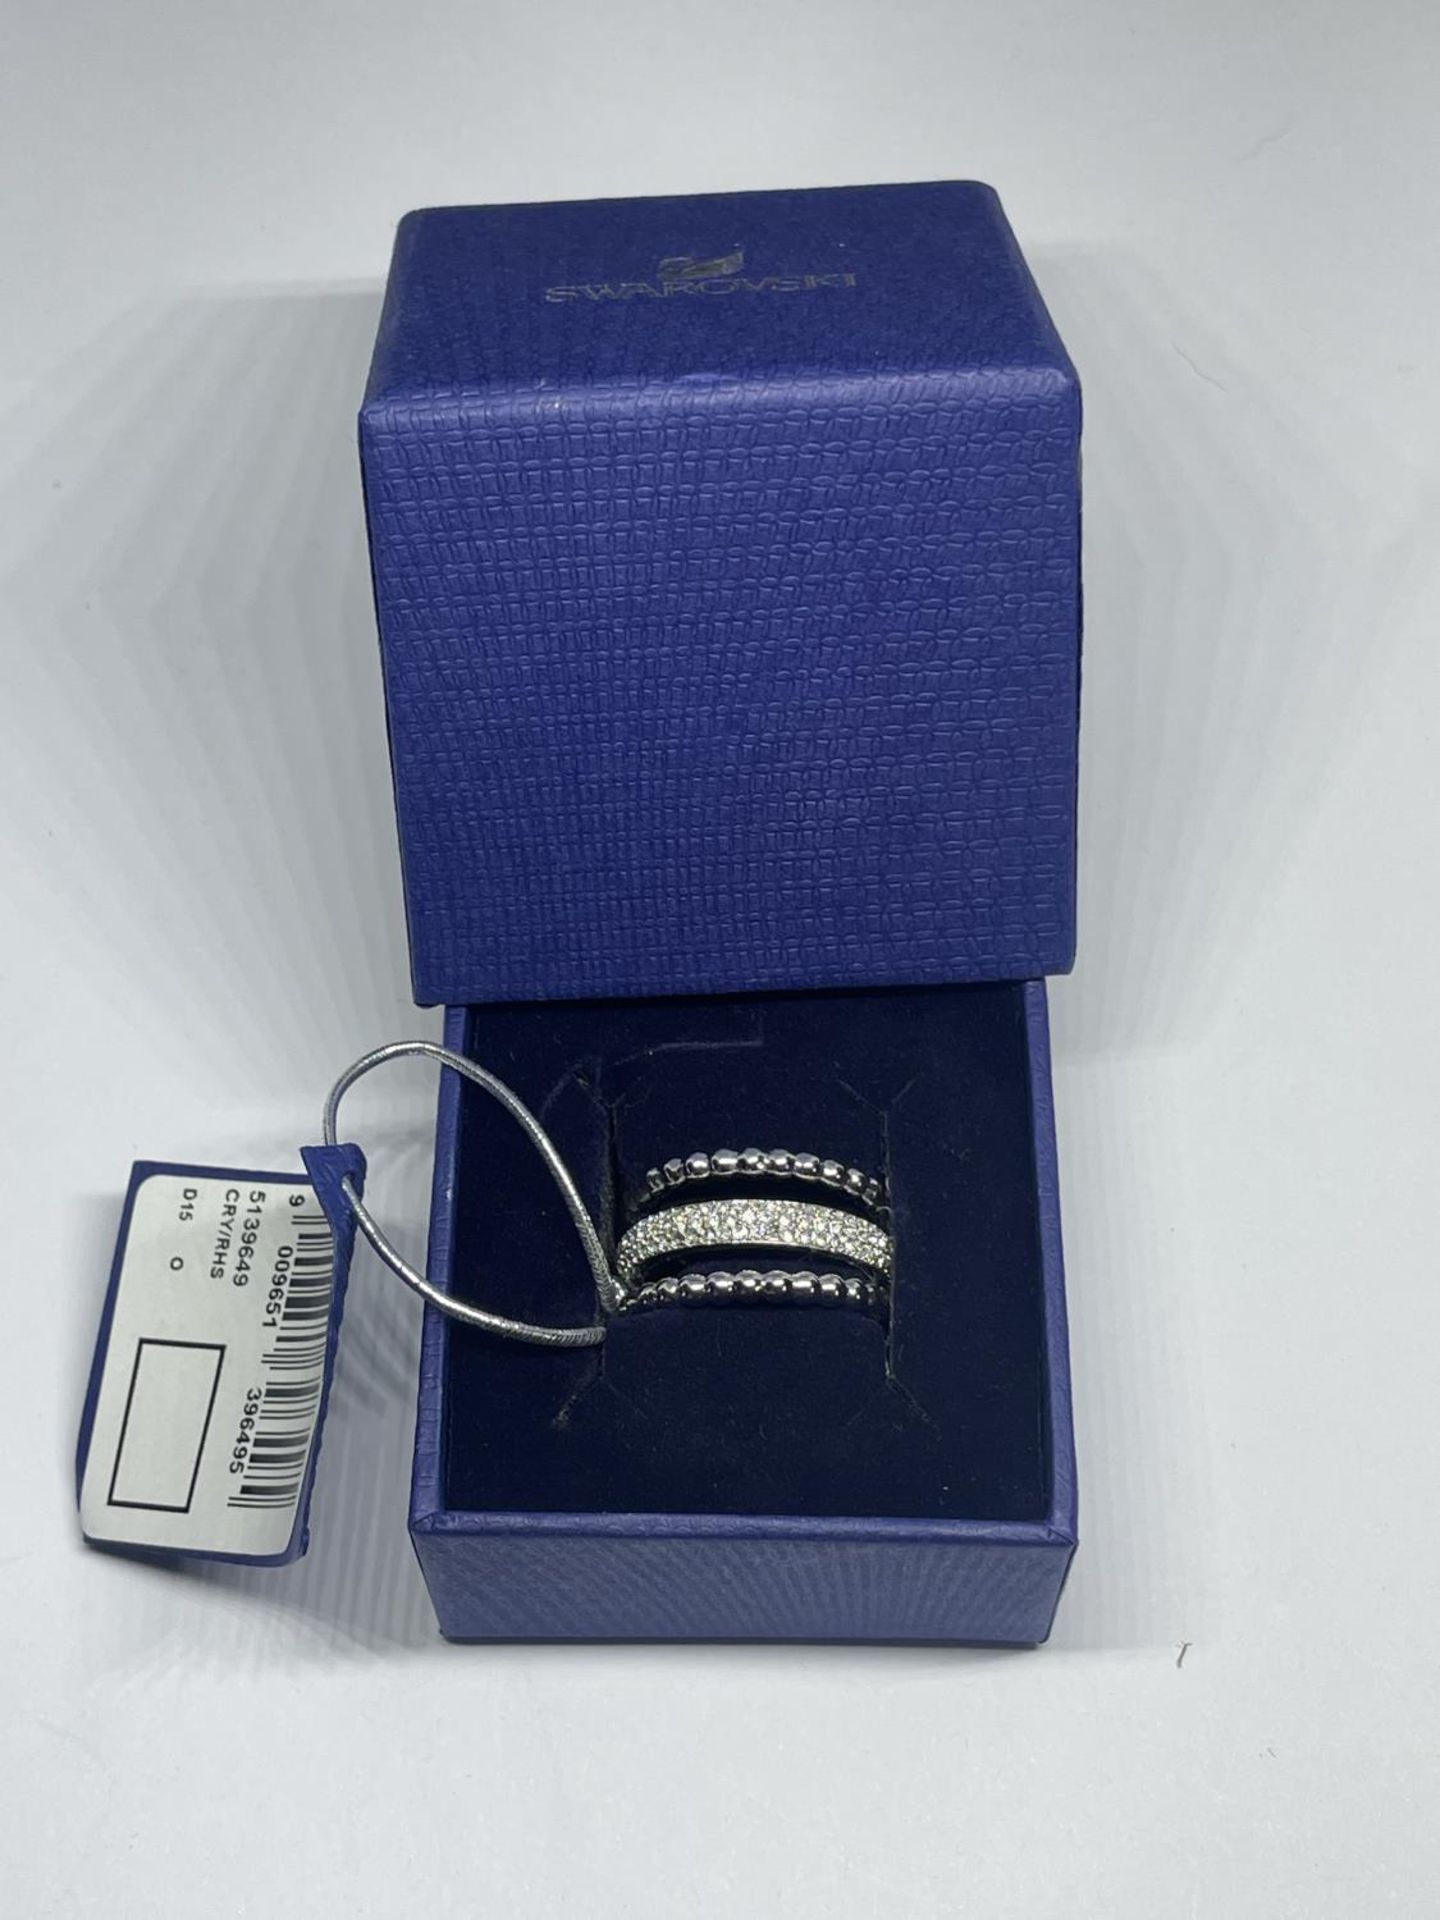 A SWAROVSKI CRYSTAL RING WITH LABEL IN A PRESENTATION BOX WITH SLEEVE SIZE Q/R - Image 2 of 2